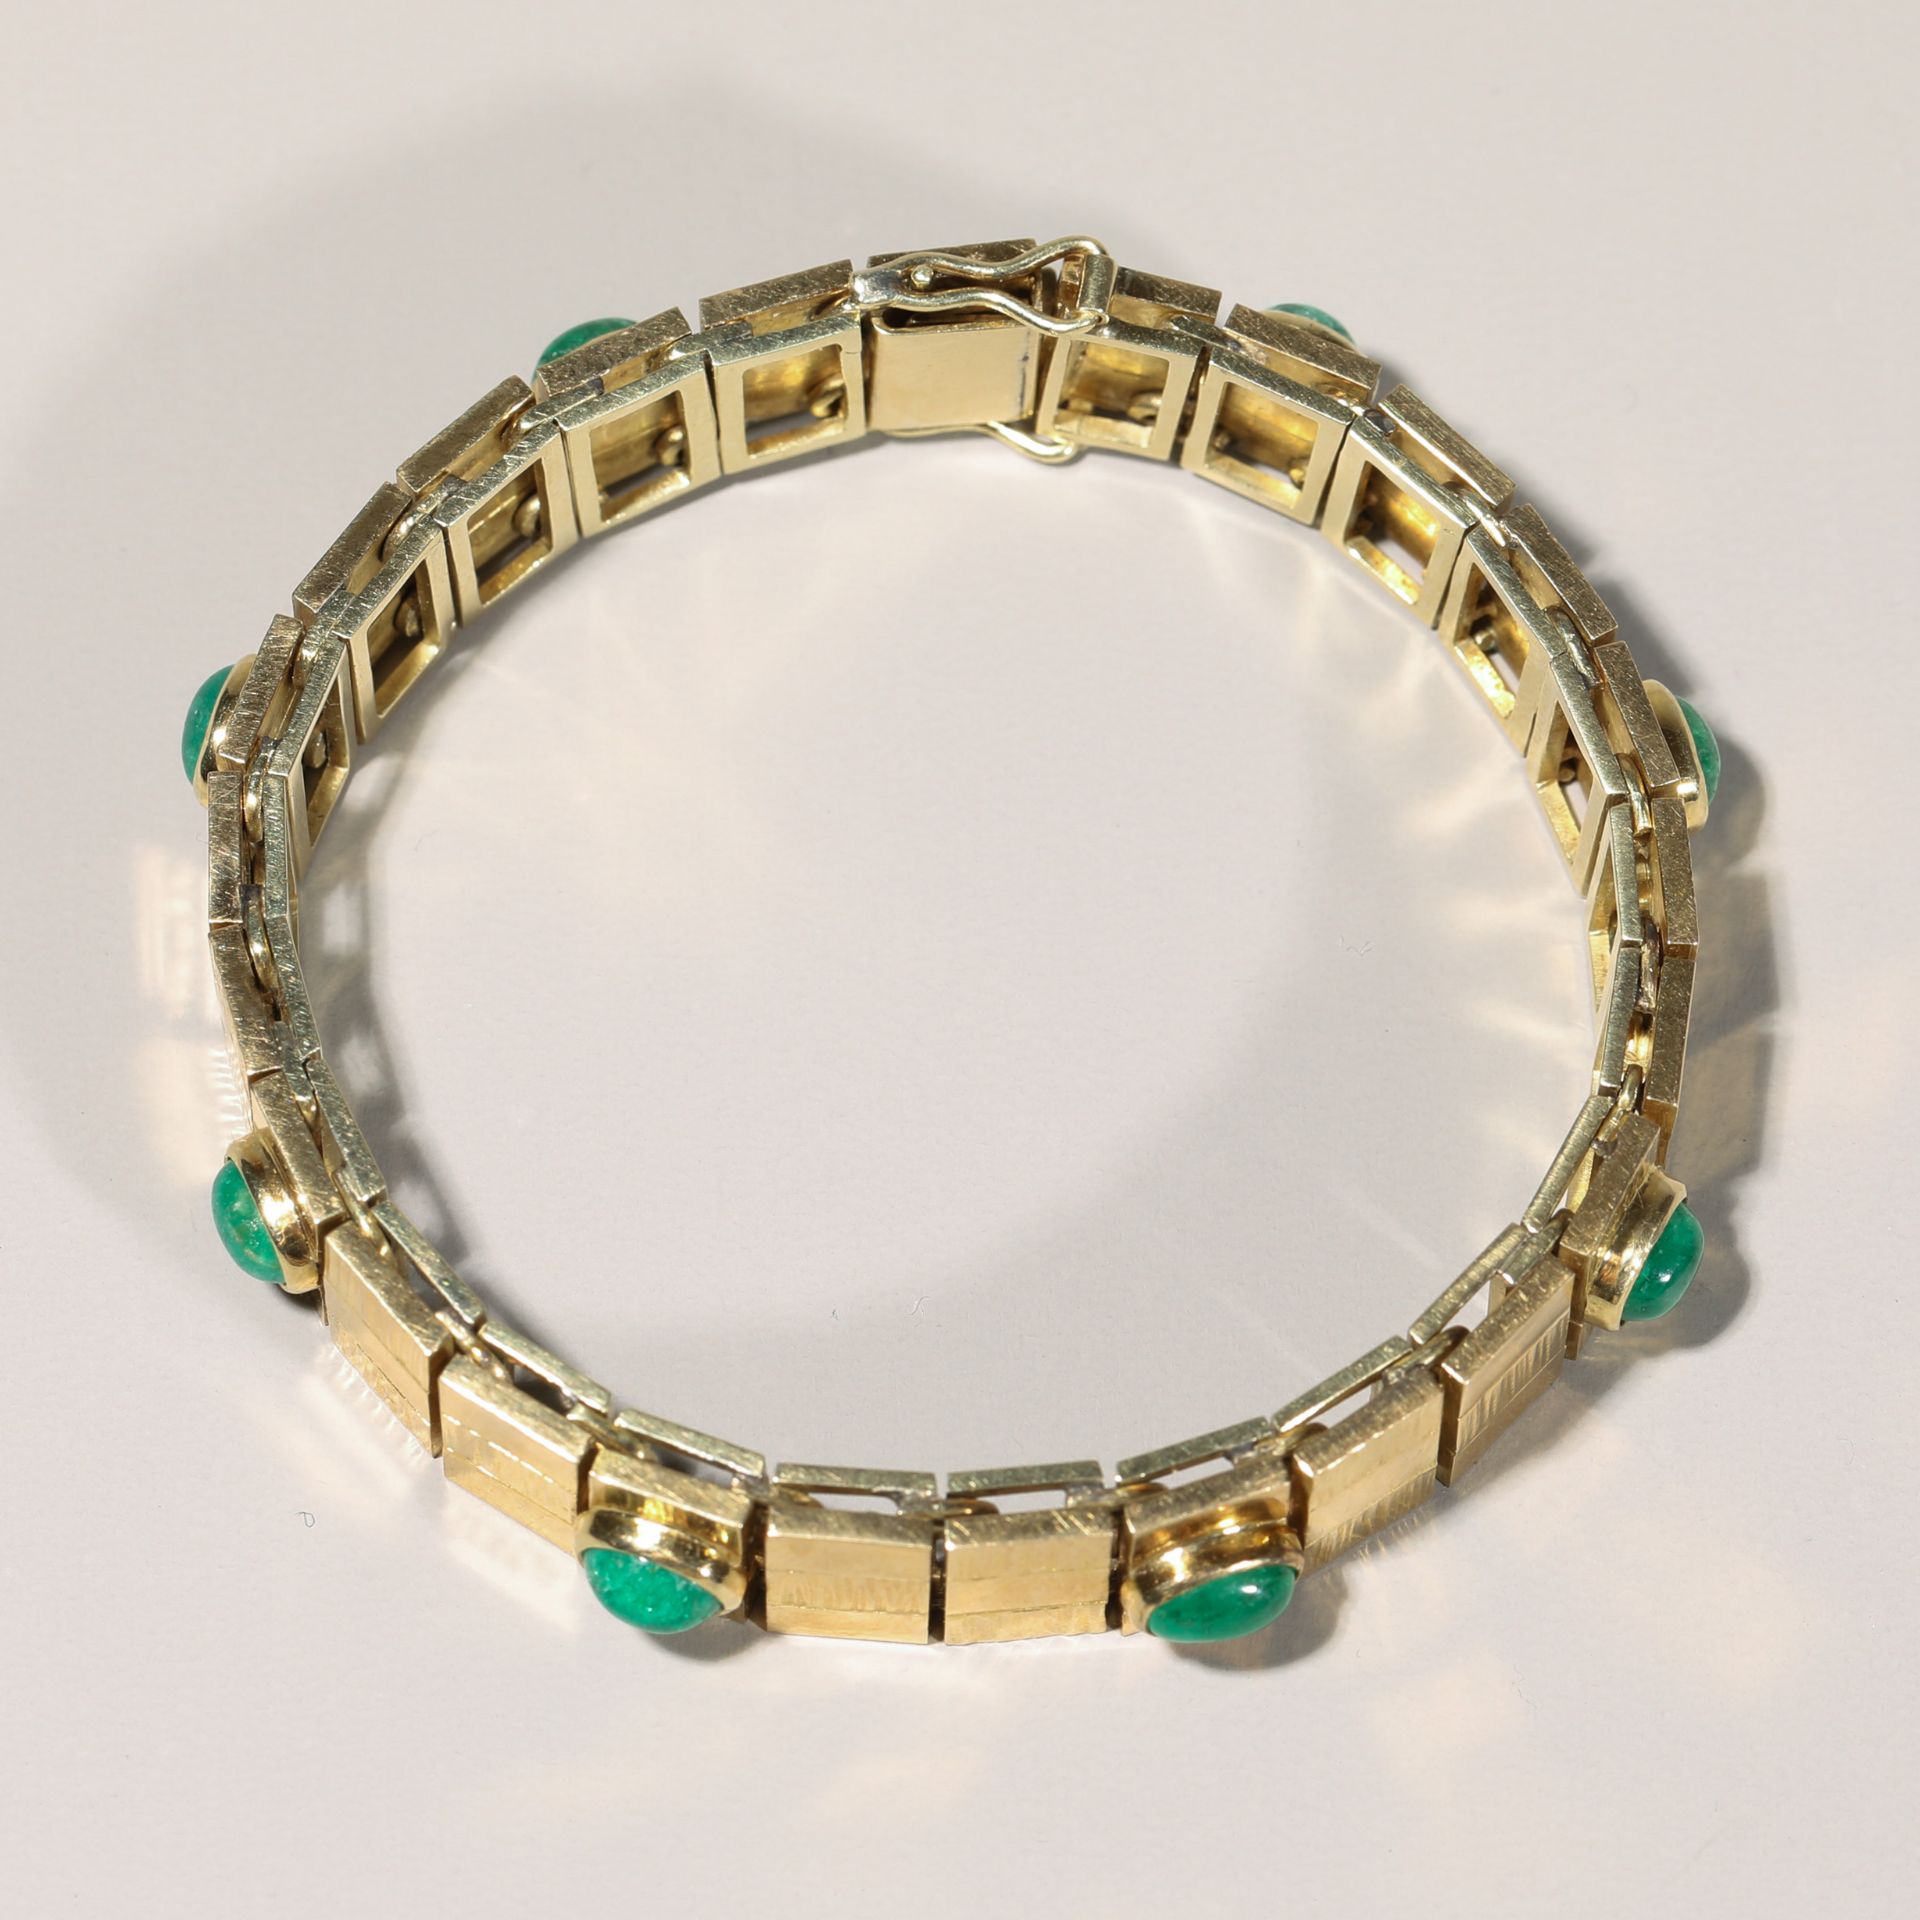 Gold bracelet with emerald cabochons - Image 4 of 7